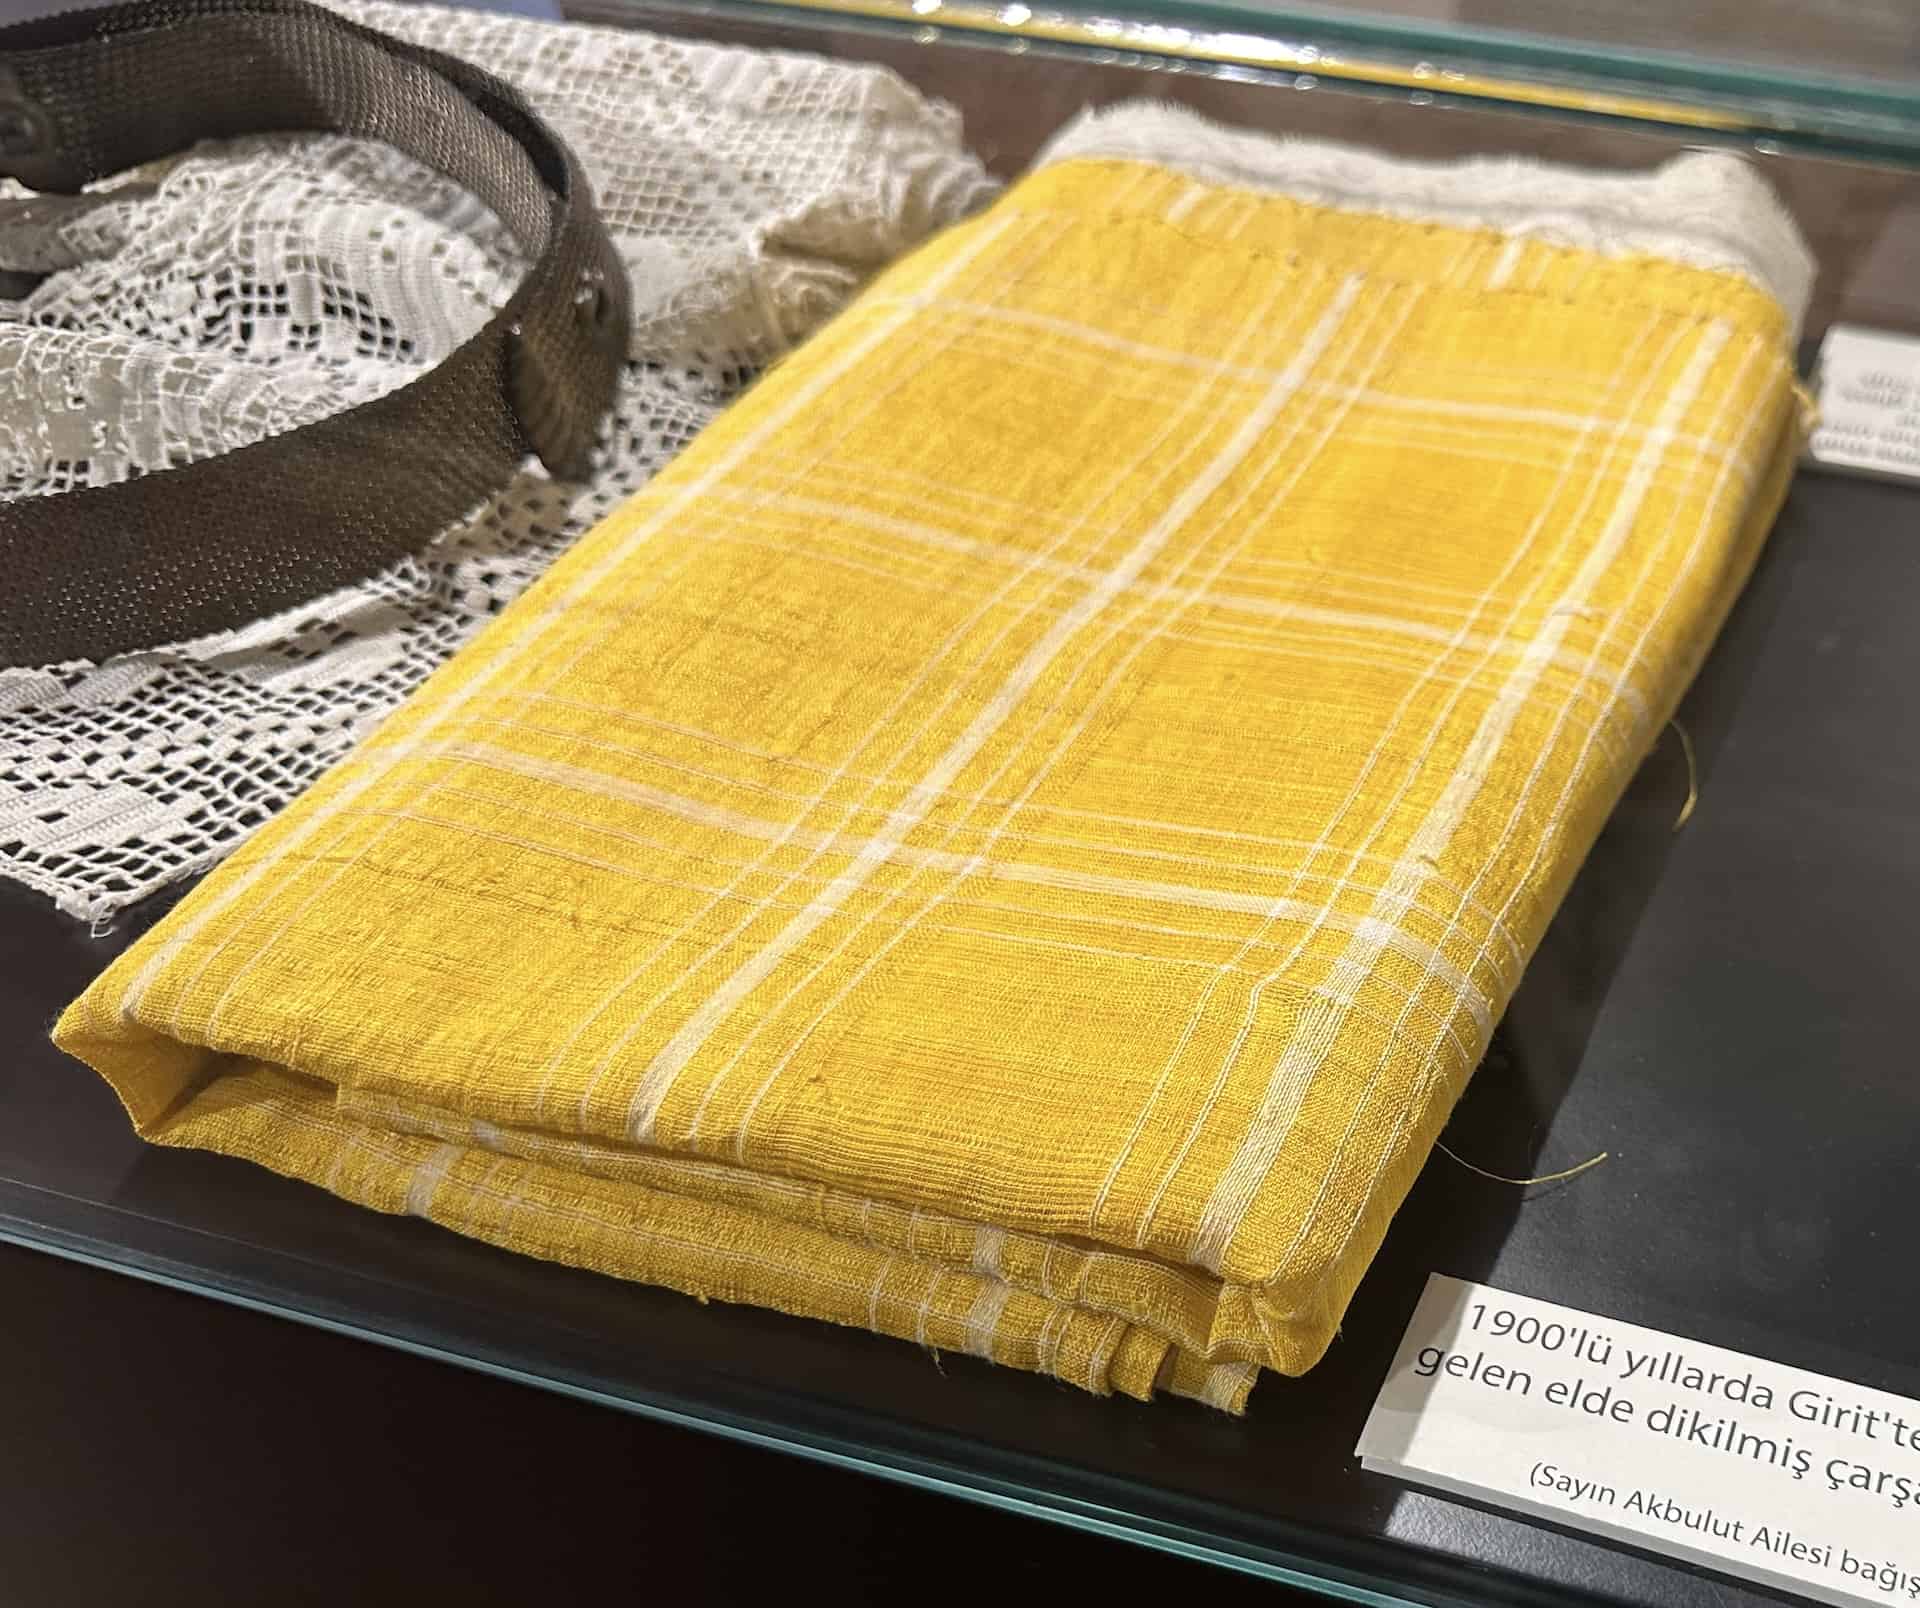 Hand sewn sheets from Crete; 1900; donated by the Akbulut family in the immigration section at the Selçuk City Memory Museum in Selçuk, Turkey